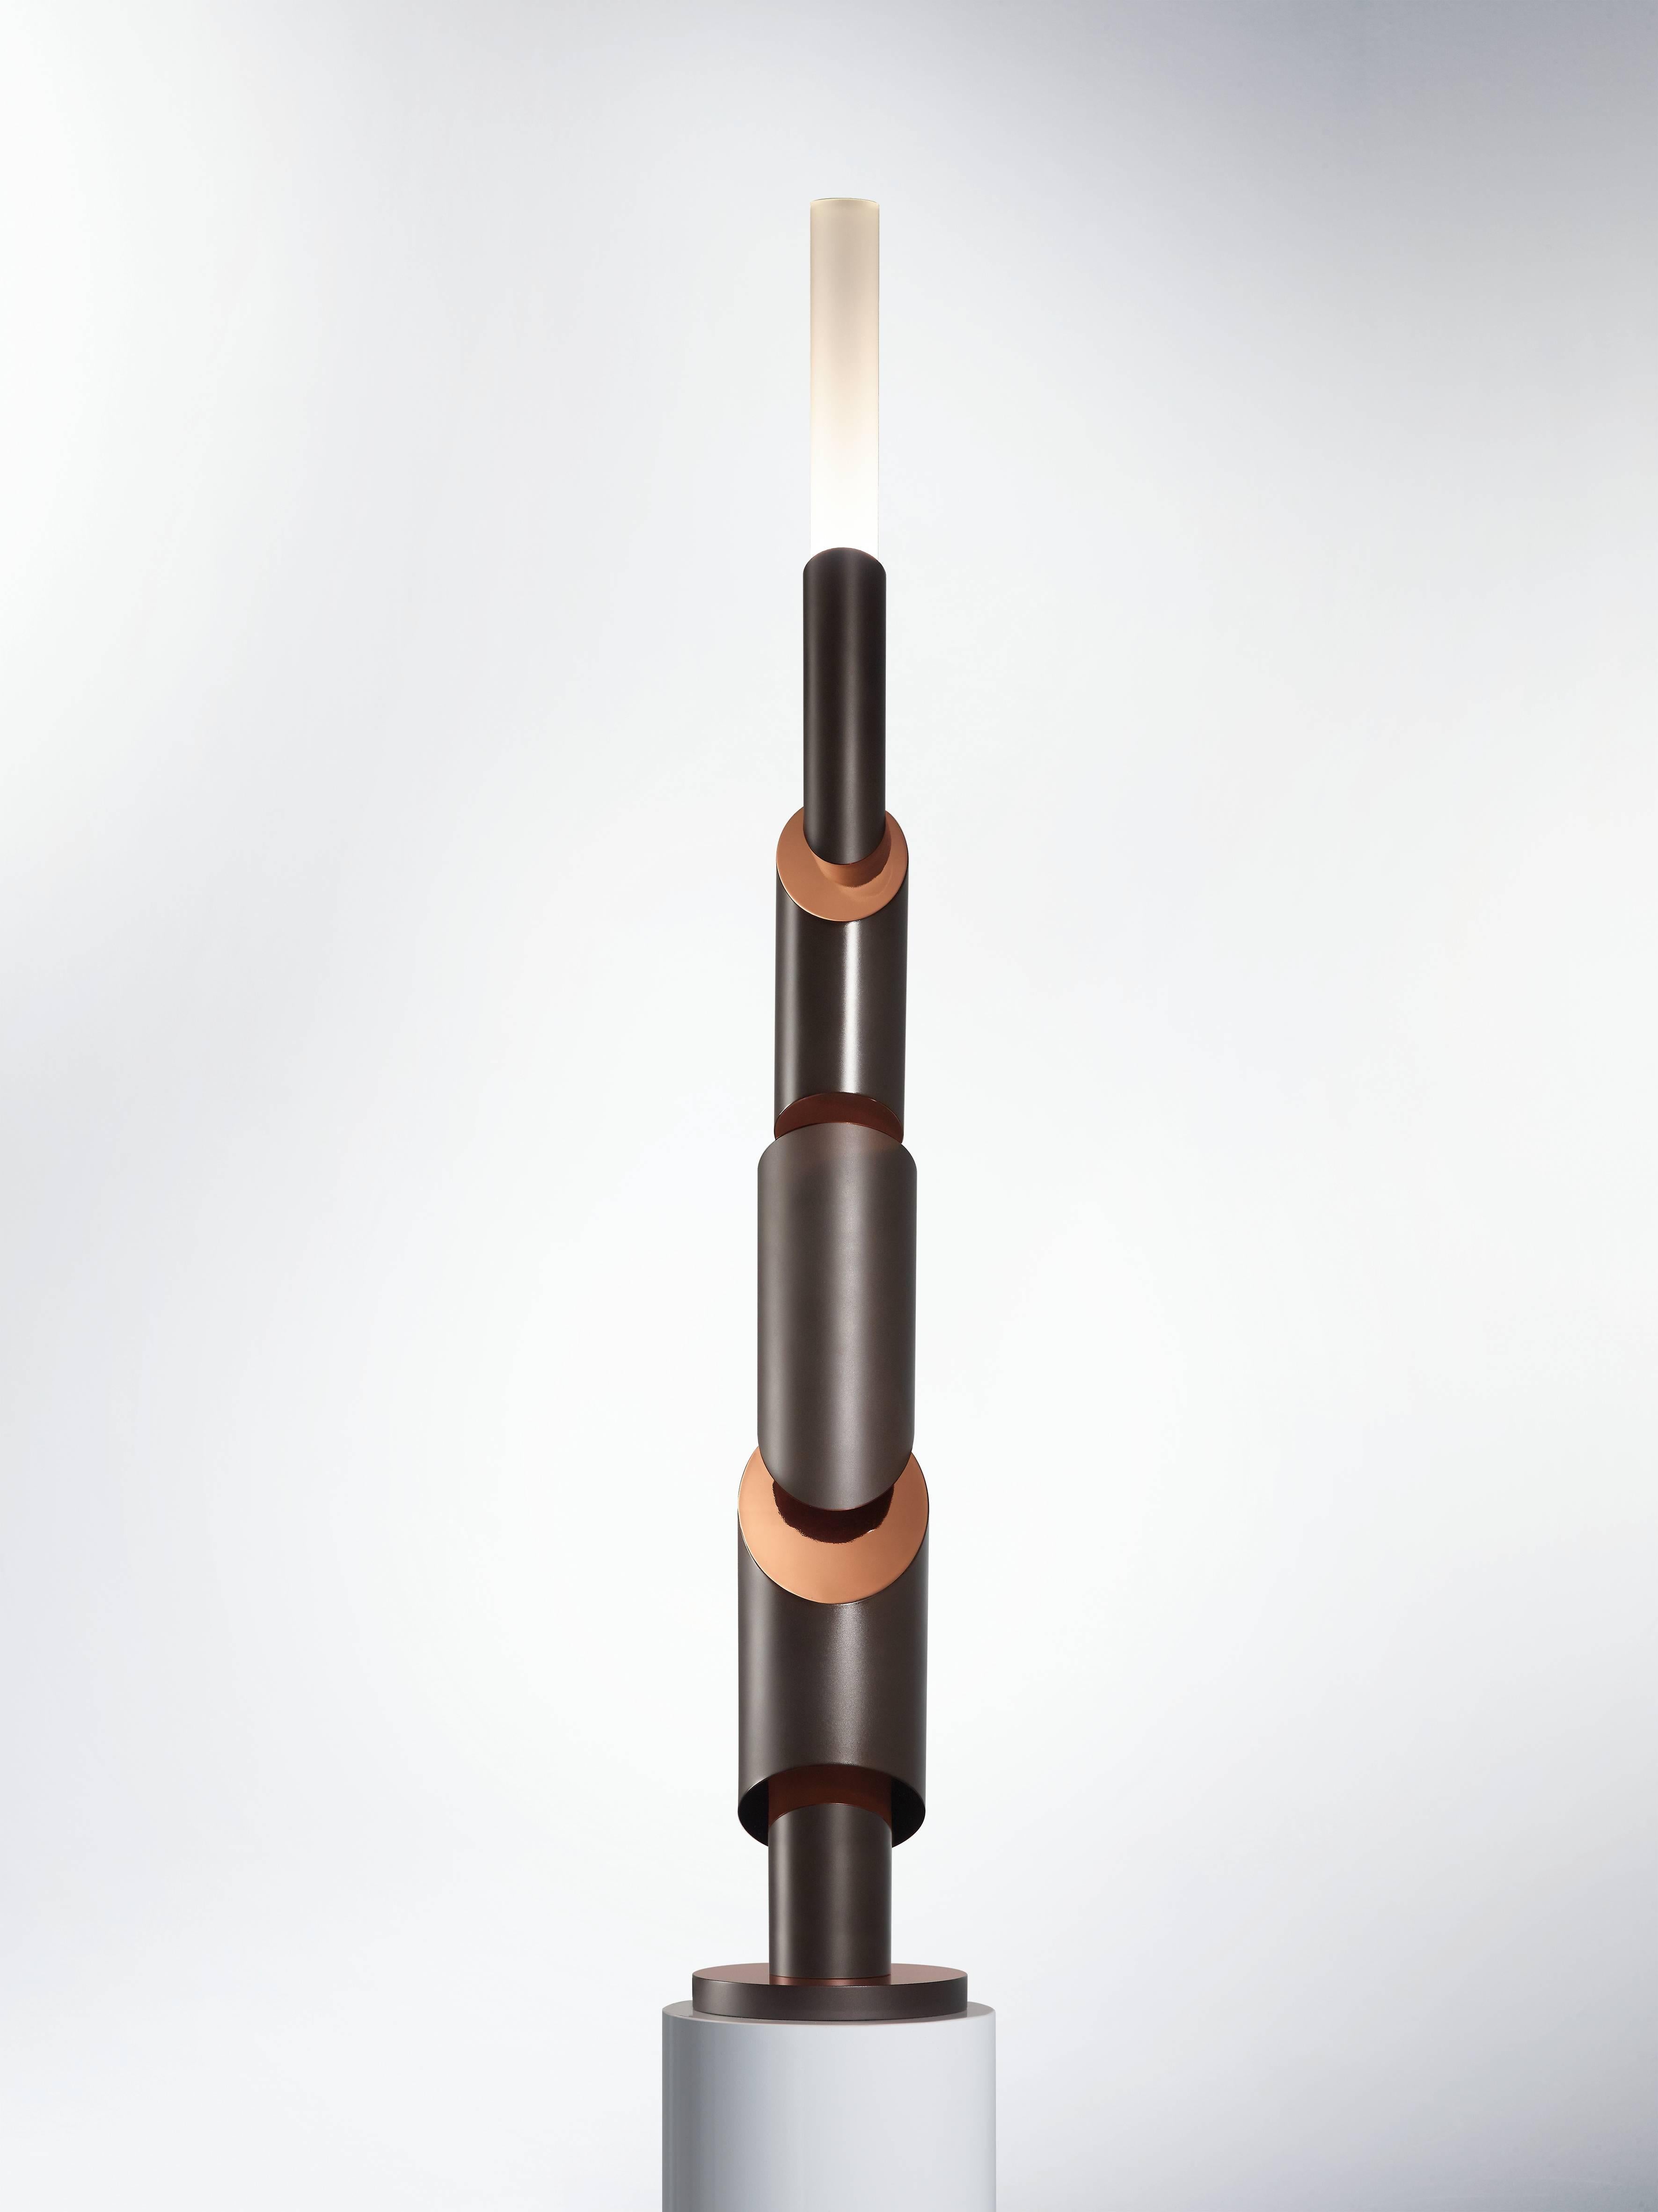 TOTEM I - Table lamp, cigned William Guillon 
Limited edition of 12
Signed and numbered
Solid aluminium, smoke nickel / copper finish.
Sand-blasted / polished
Dimensions: 108 x 18 x 18 cm 
Hand-sculpted in France.




Collapse